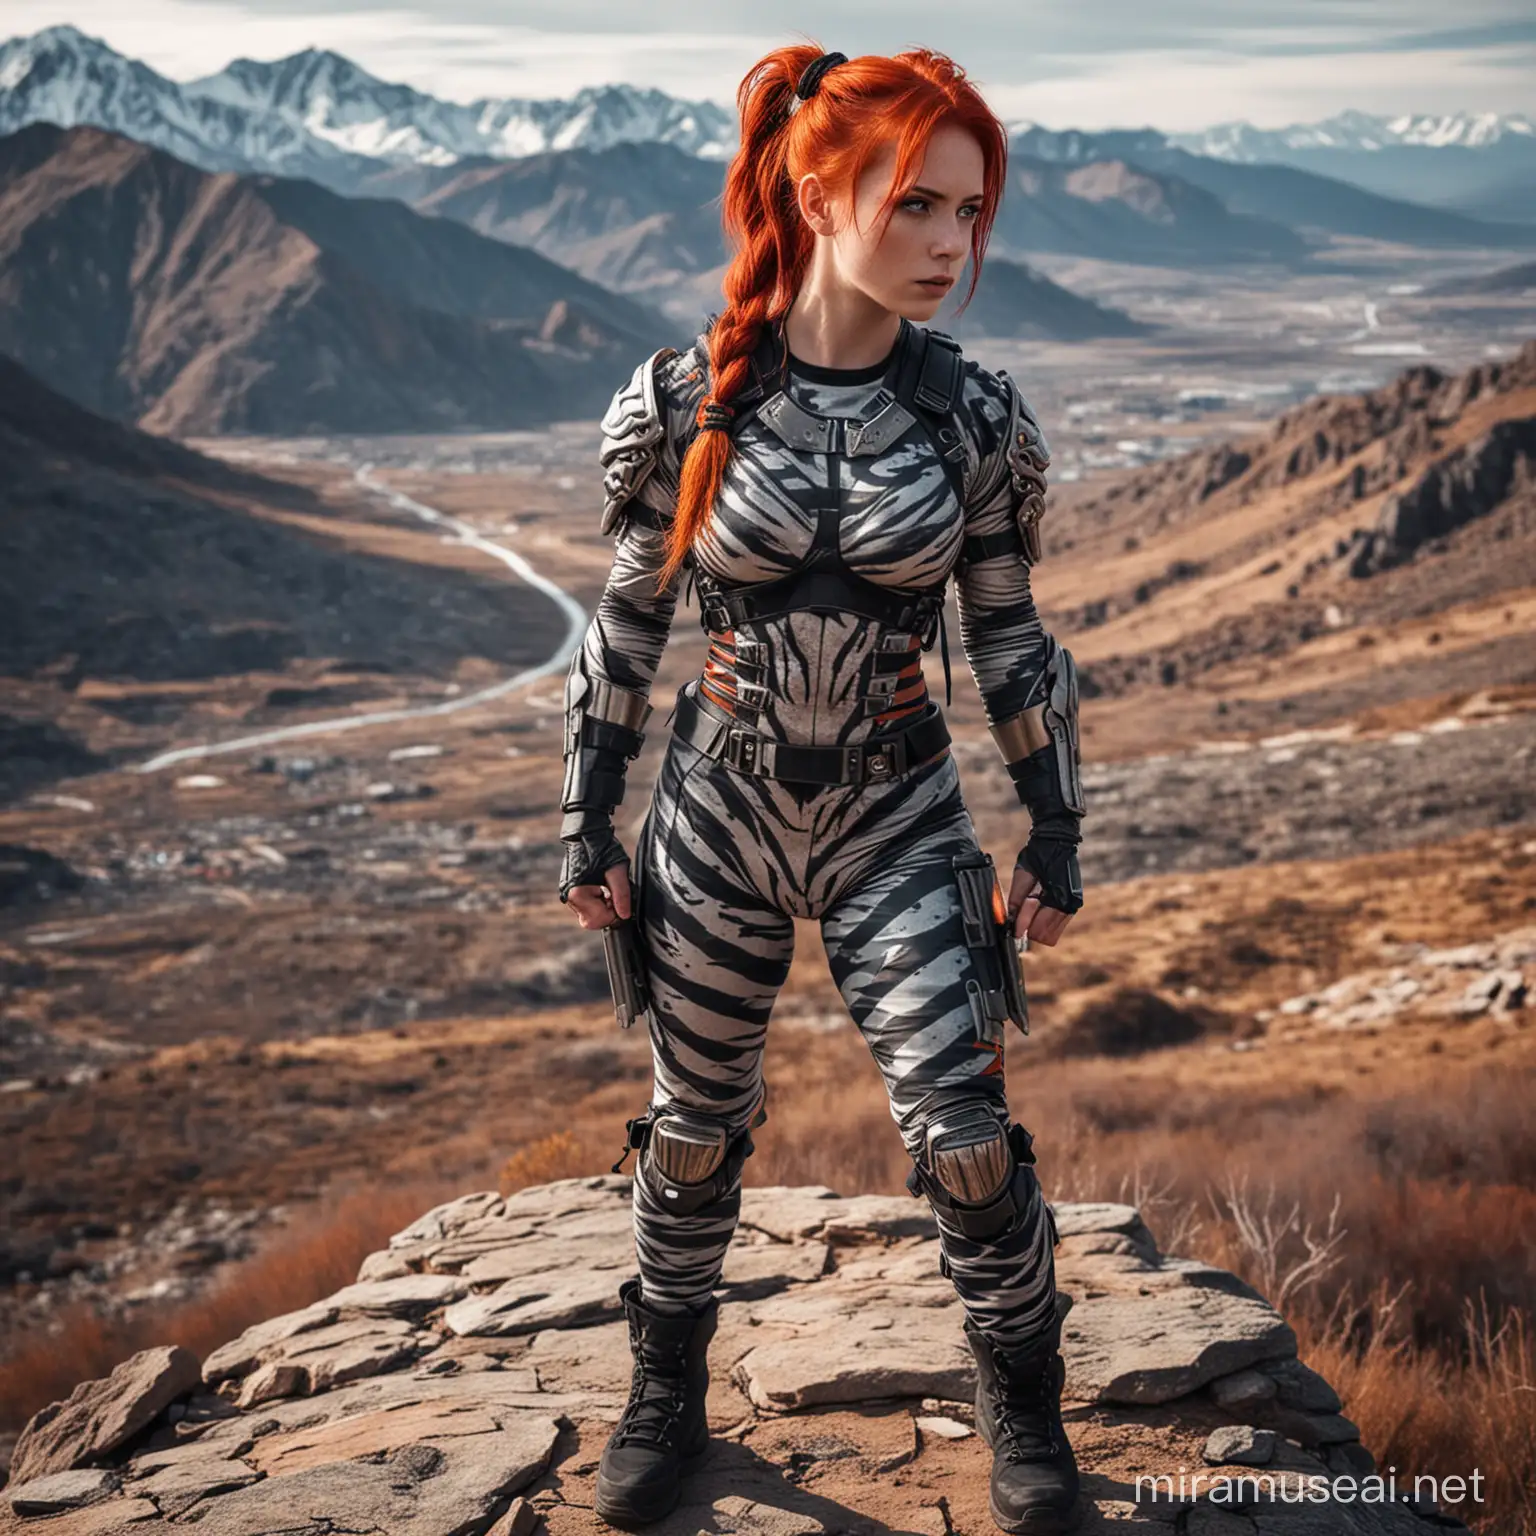 female future warrior in tiger striped outfit, red hair in pigtails, on a mountain top, ready to punce, full body